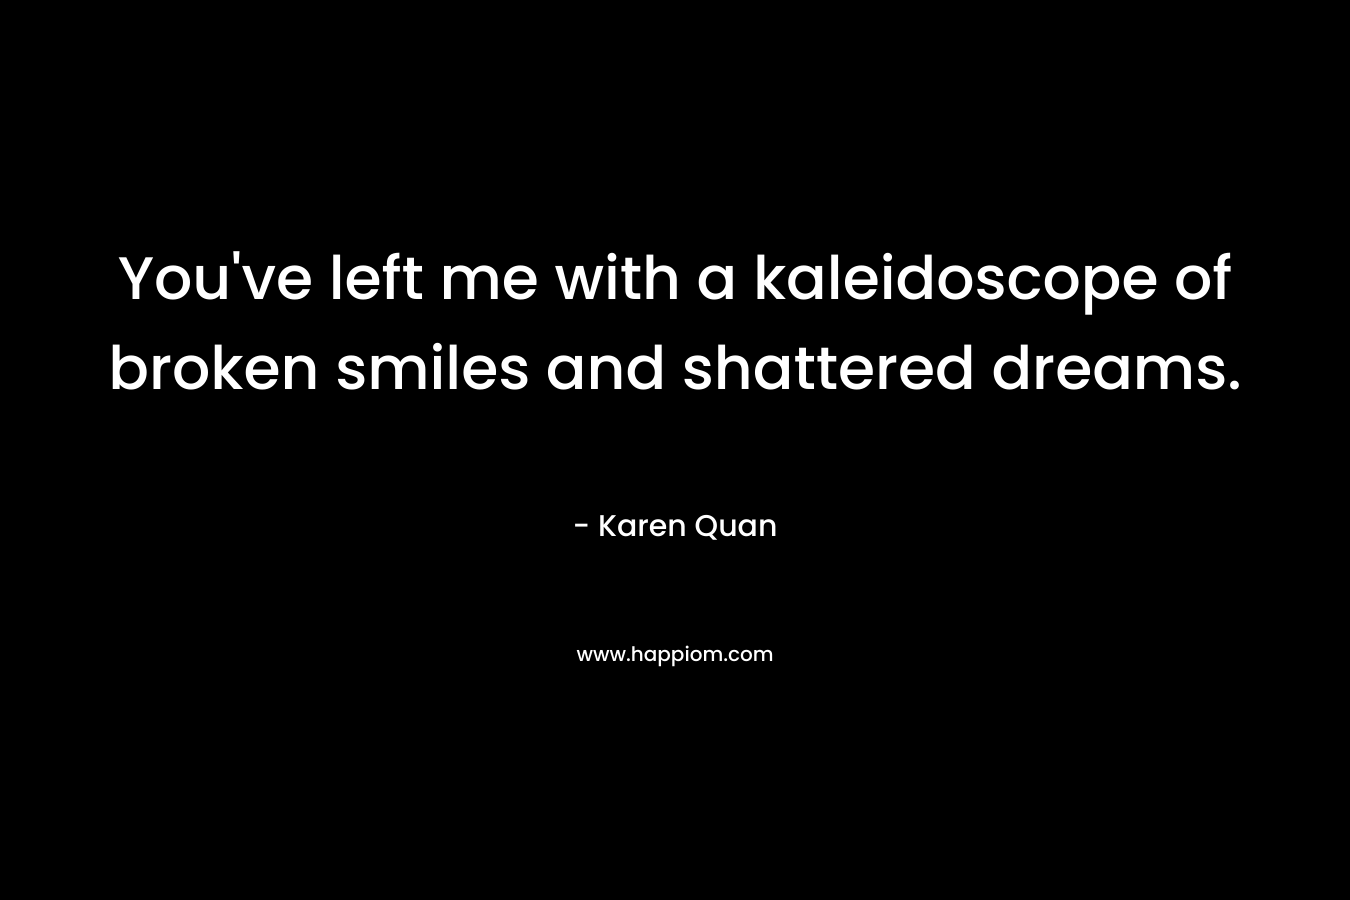 You've left me with a kaleidoscope of broken smiles and shattered dreams.